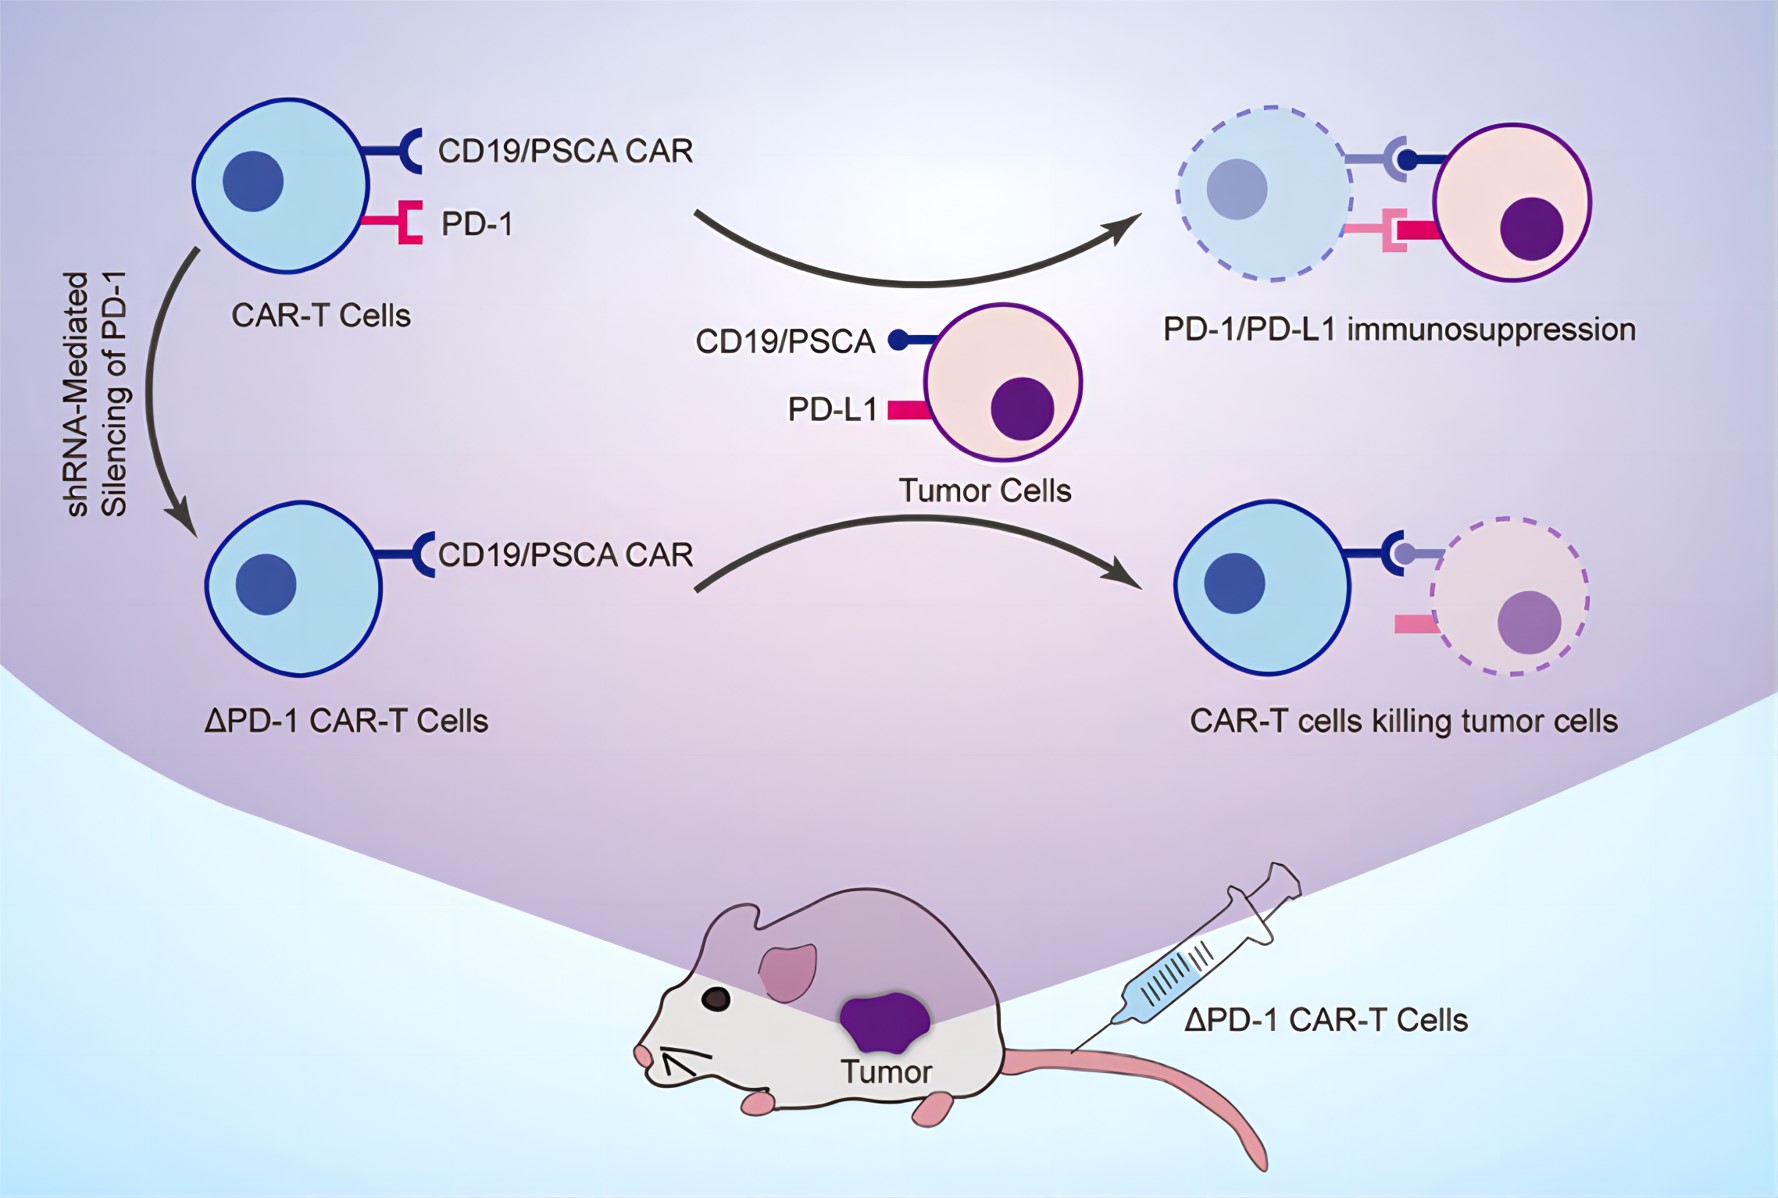 Example of blockage of PD-1 in CAR-T cells by shRNA technologies.